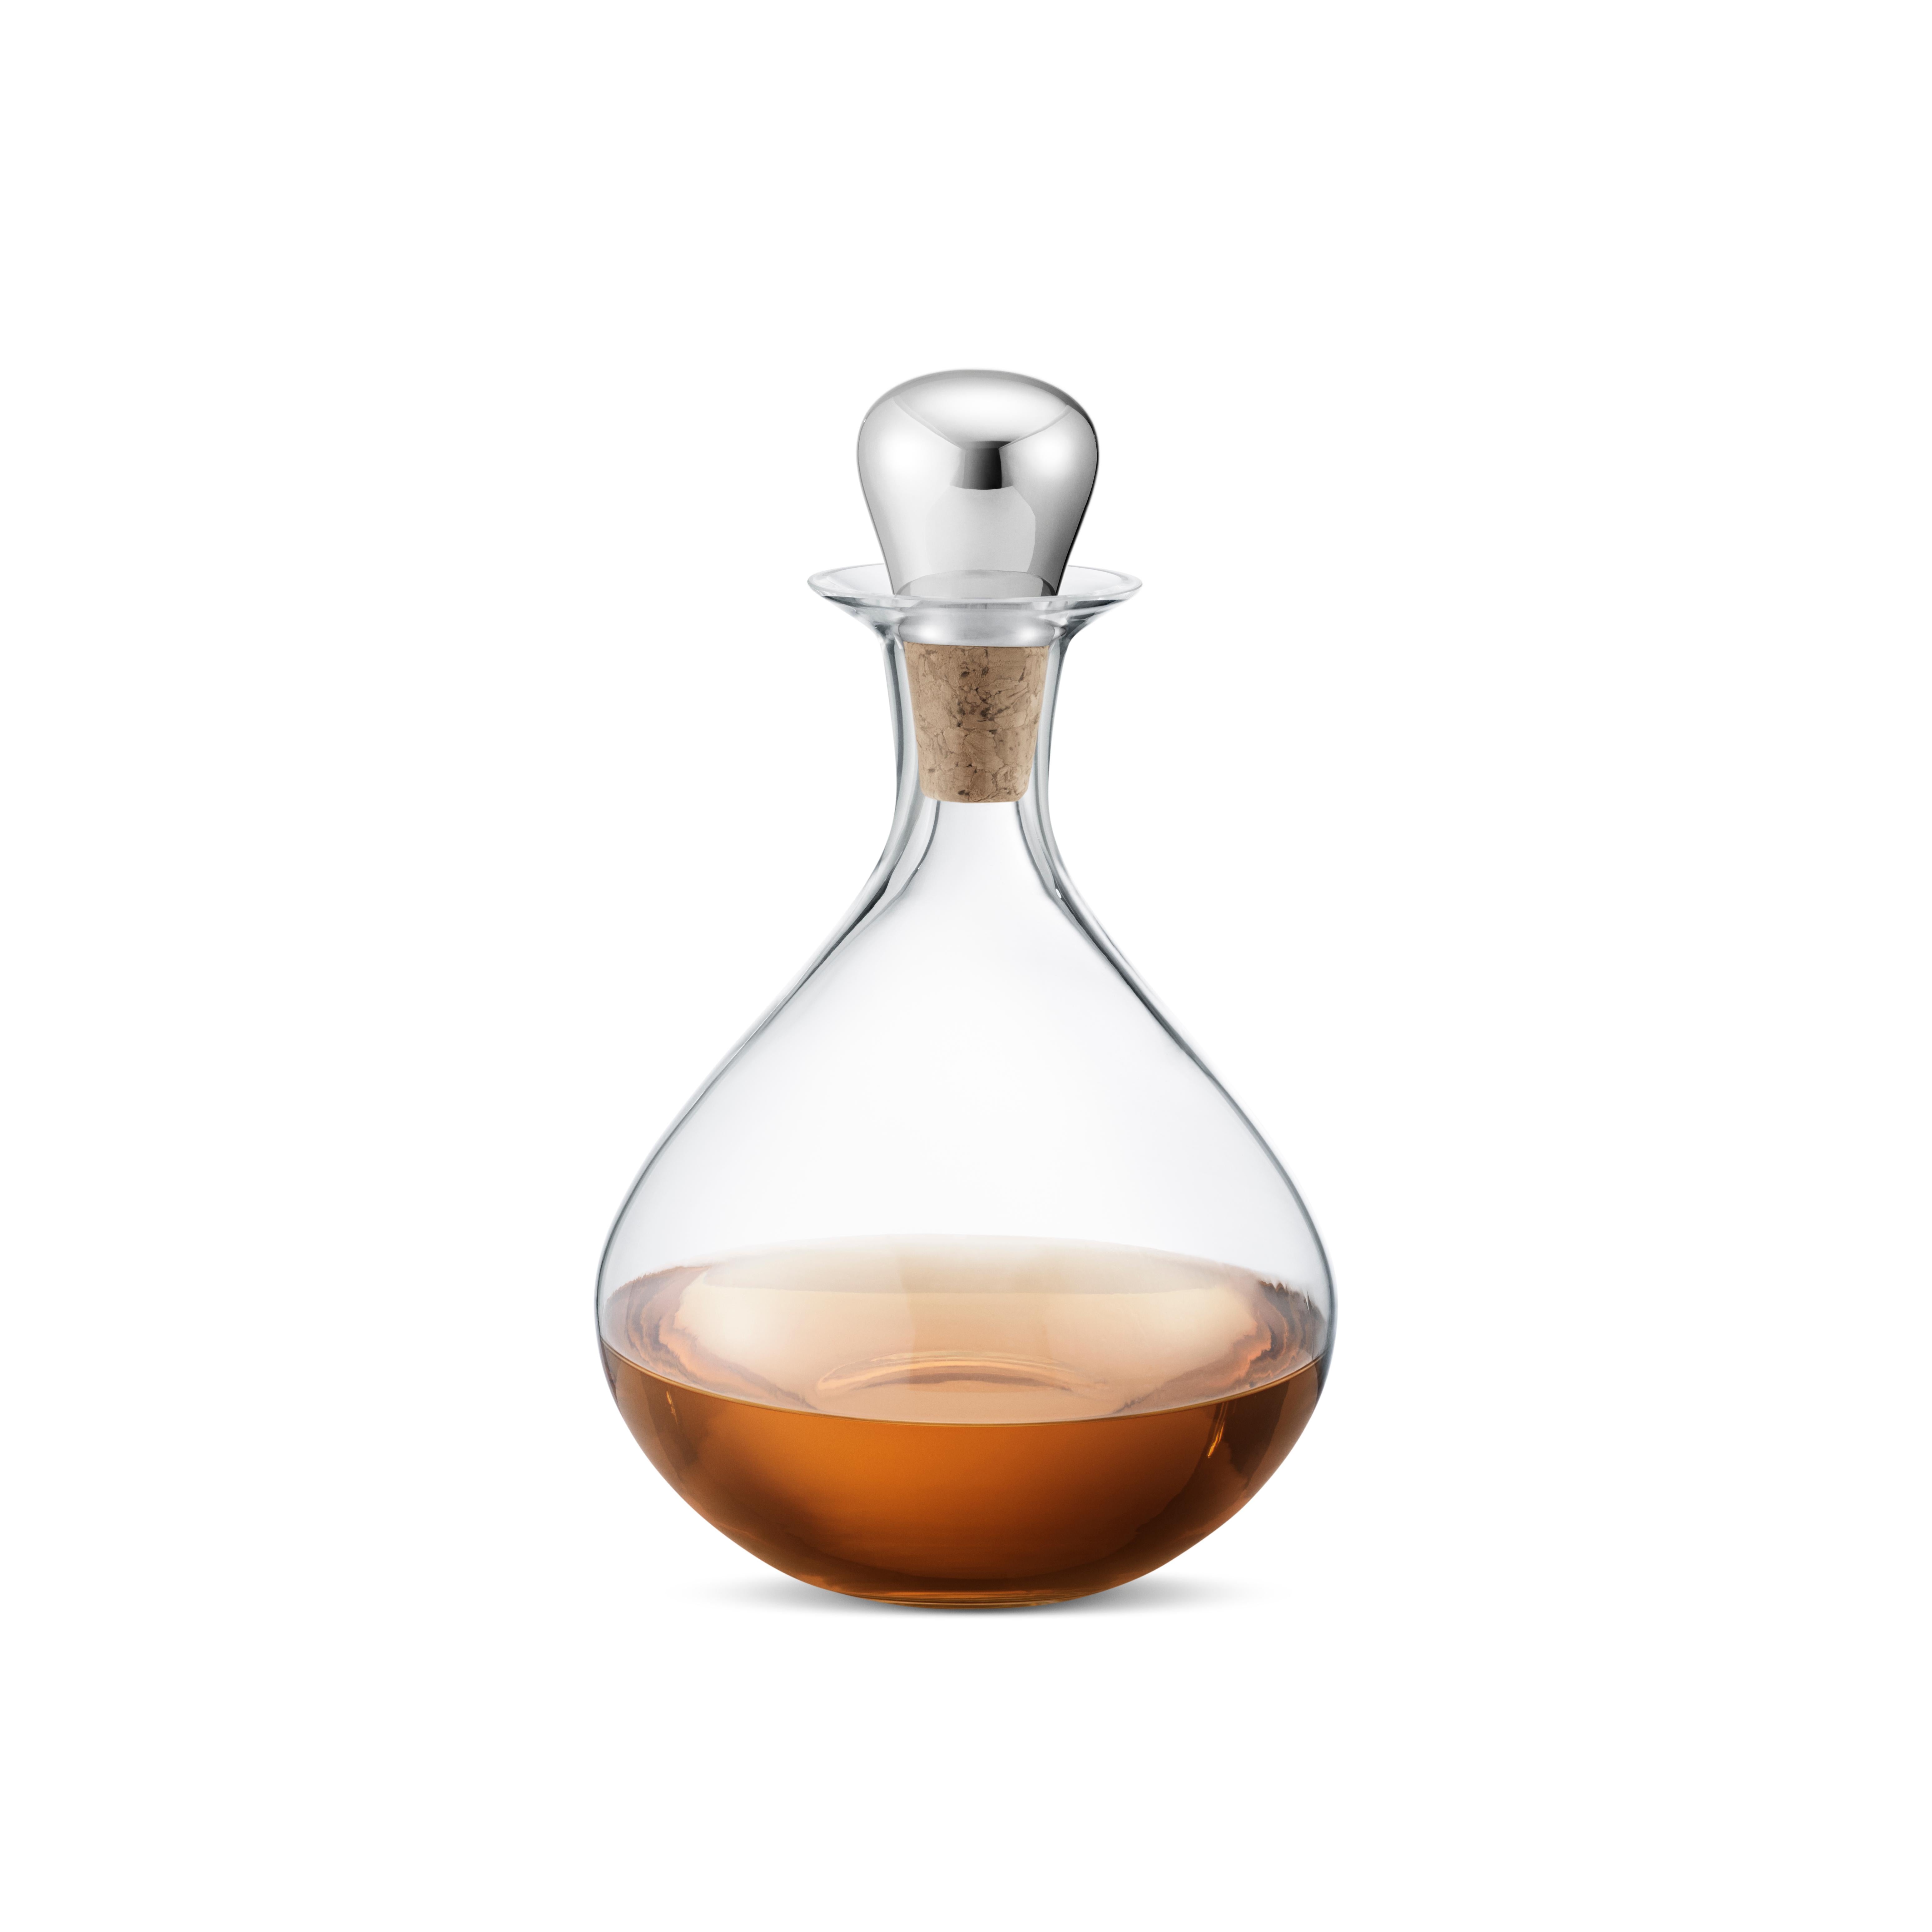 Part of the enjoyment of wine or spirits is beyond just taste: the beautiful color and aroma also play an important part. This beautiful crystal decanter with its ergonomic and sculptural stainless steel and cork stopper is a striking addition to